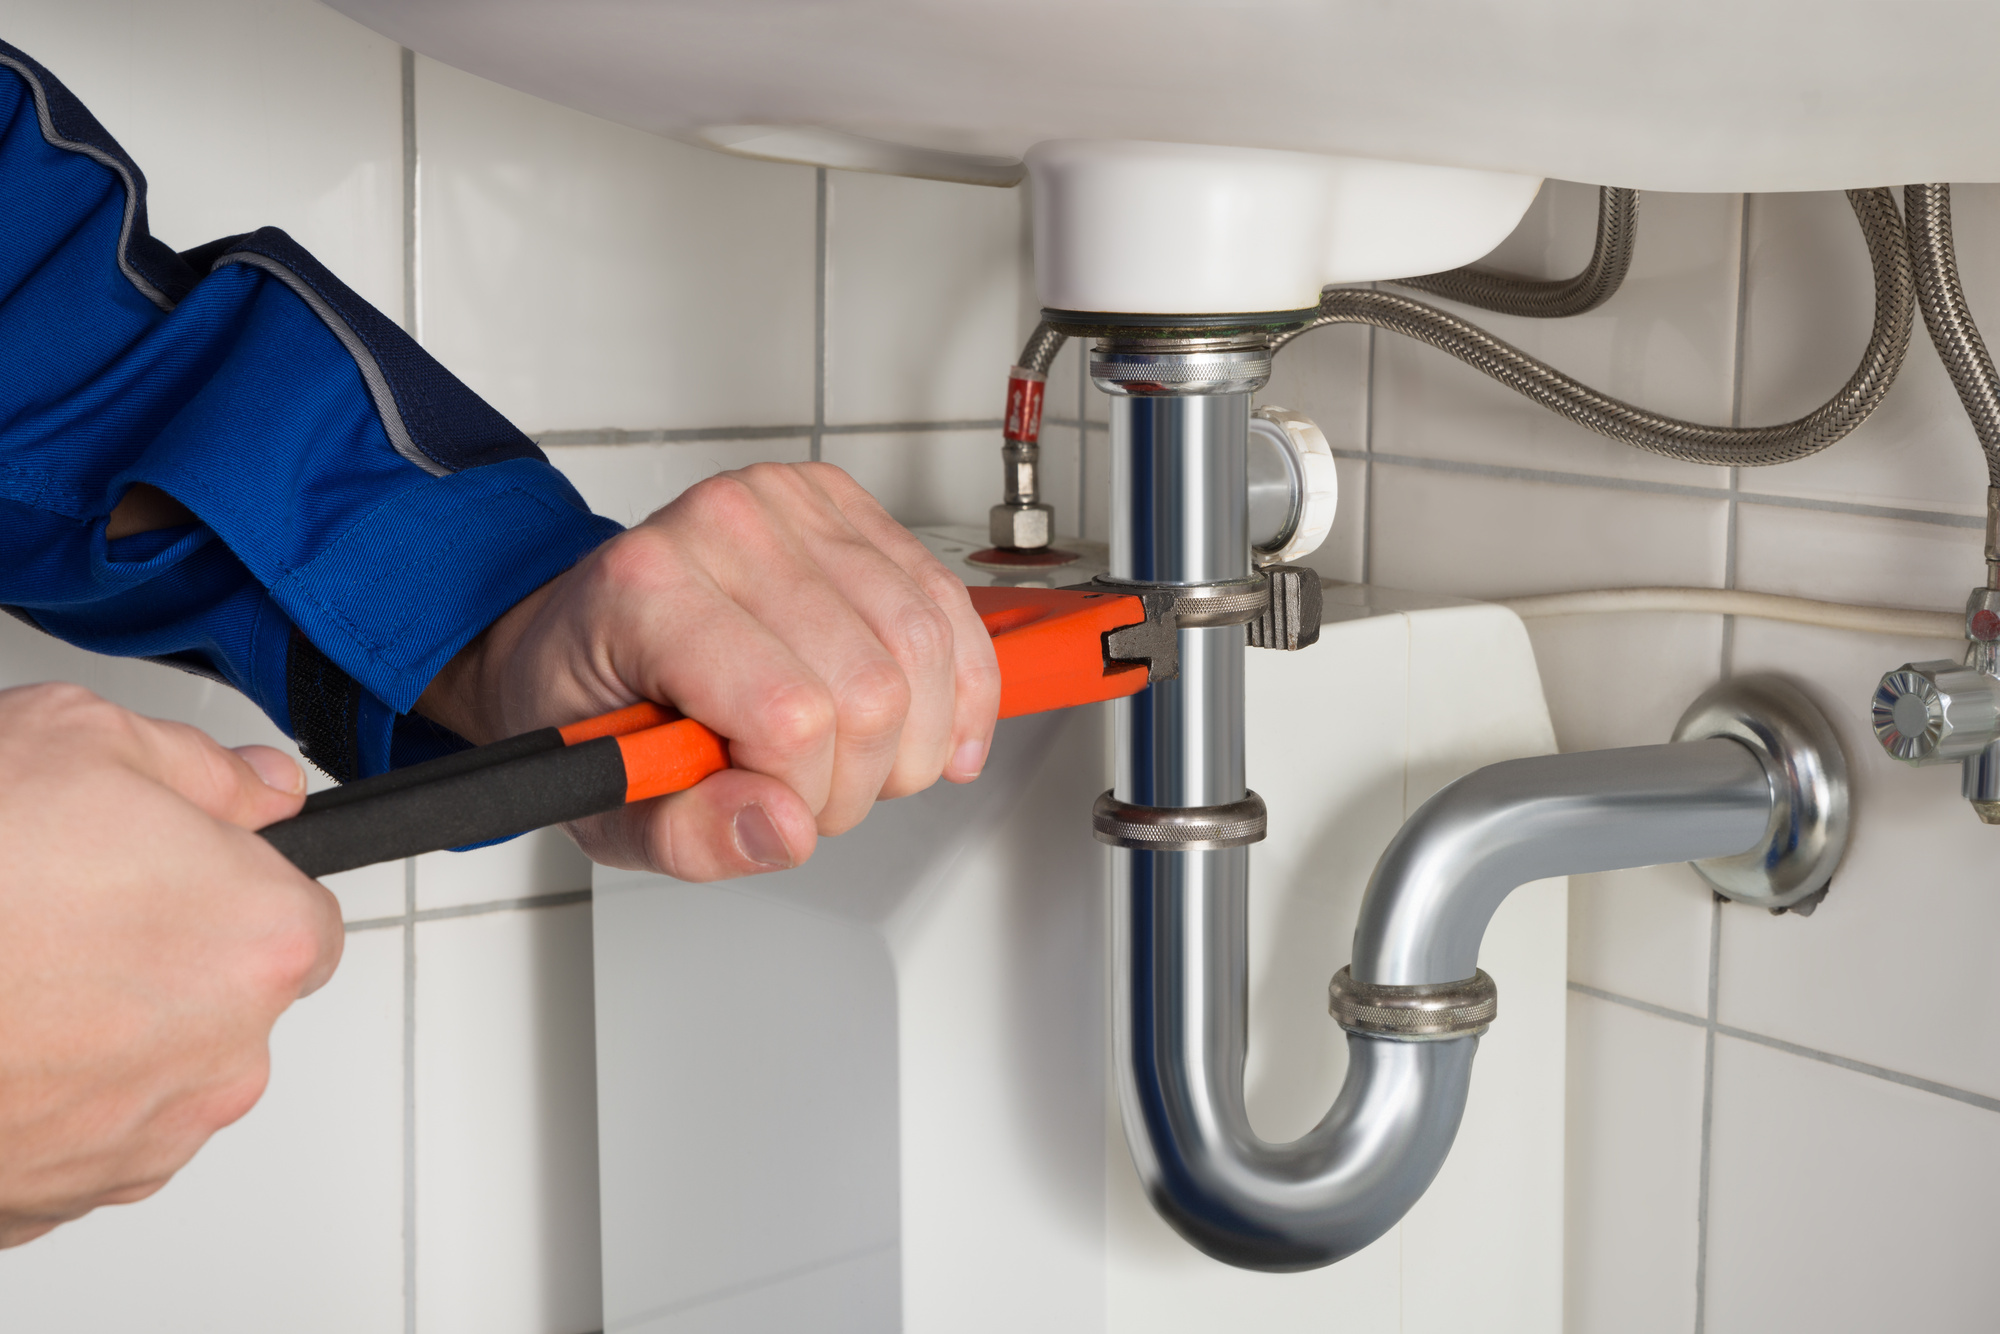 5 Key Questions to Ask Before Hiring a Plumber